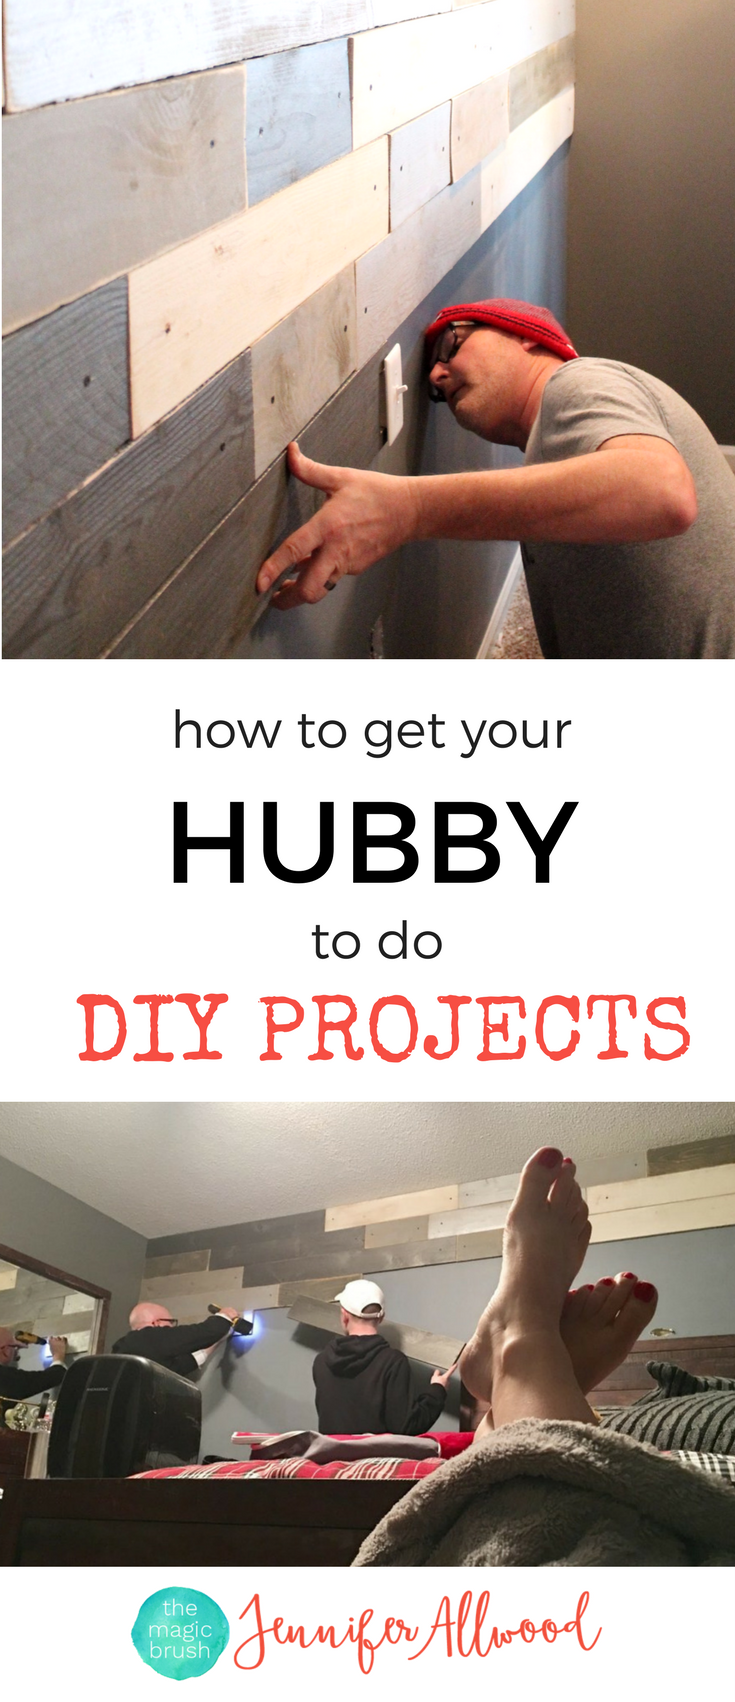 My secret on how to get your husband to do DIY projects & home improvement projects without nagging | themagicrbrushinc.com